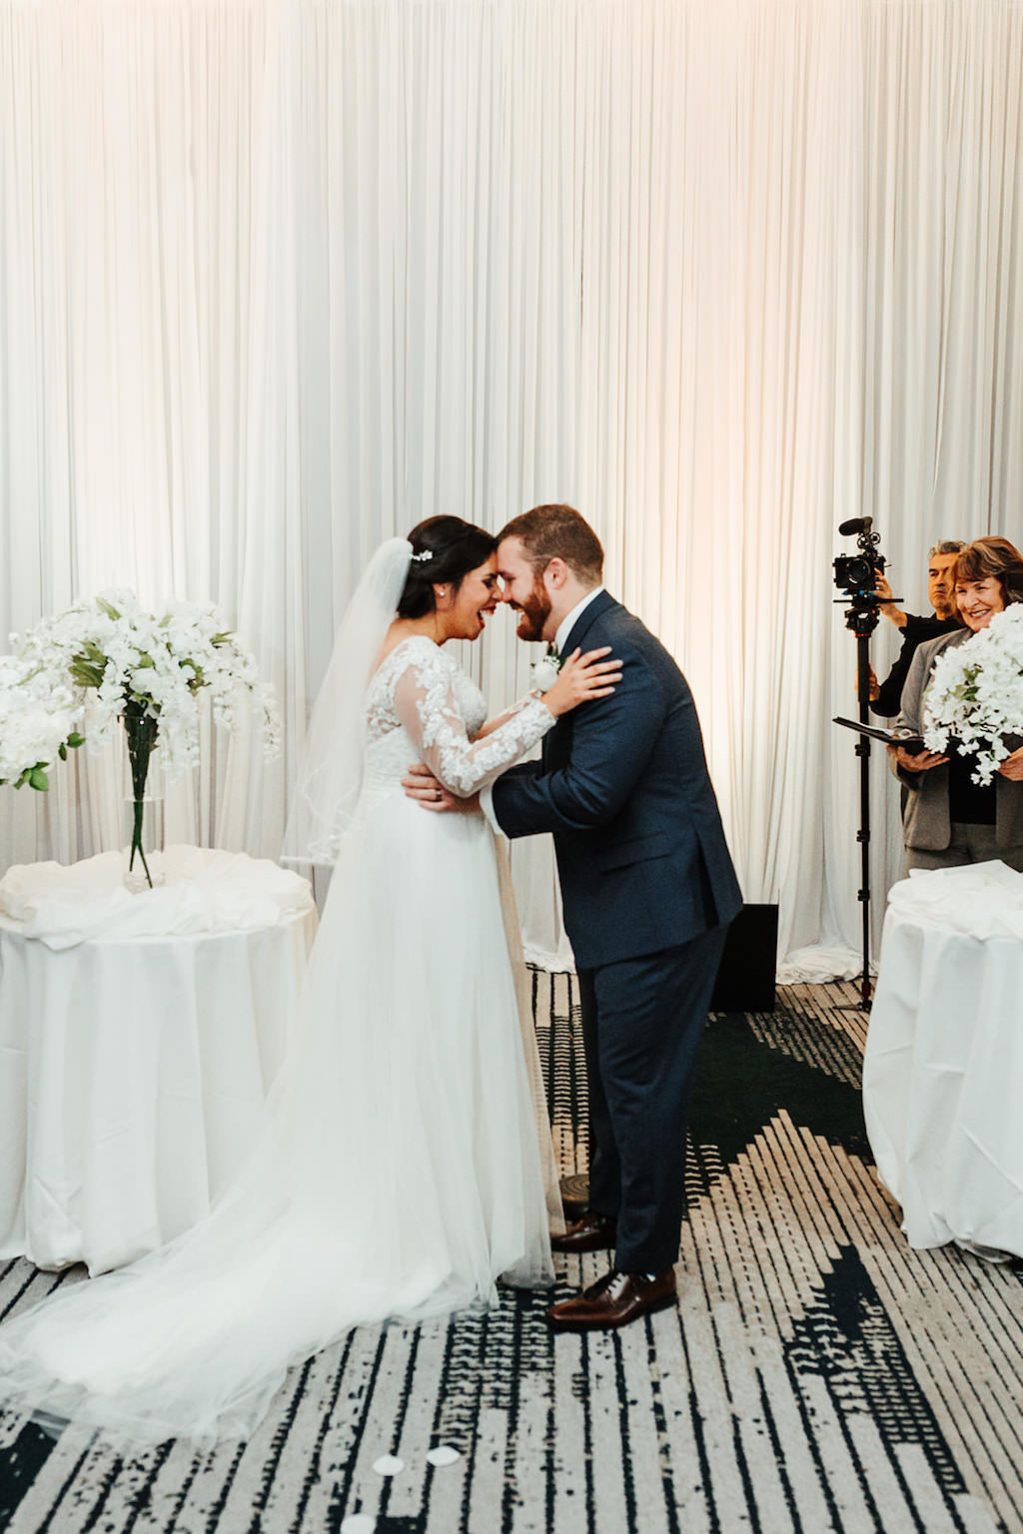 Tampa Bride and Groom Embrace During Wedding Ceremony Portrait, White Floral Decor and Draping | Florida Boutique Hotel and Wedding Venue The Hotel Alba in Westshore | Gabro Event Services